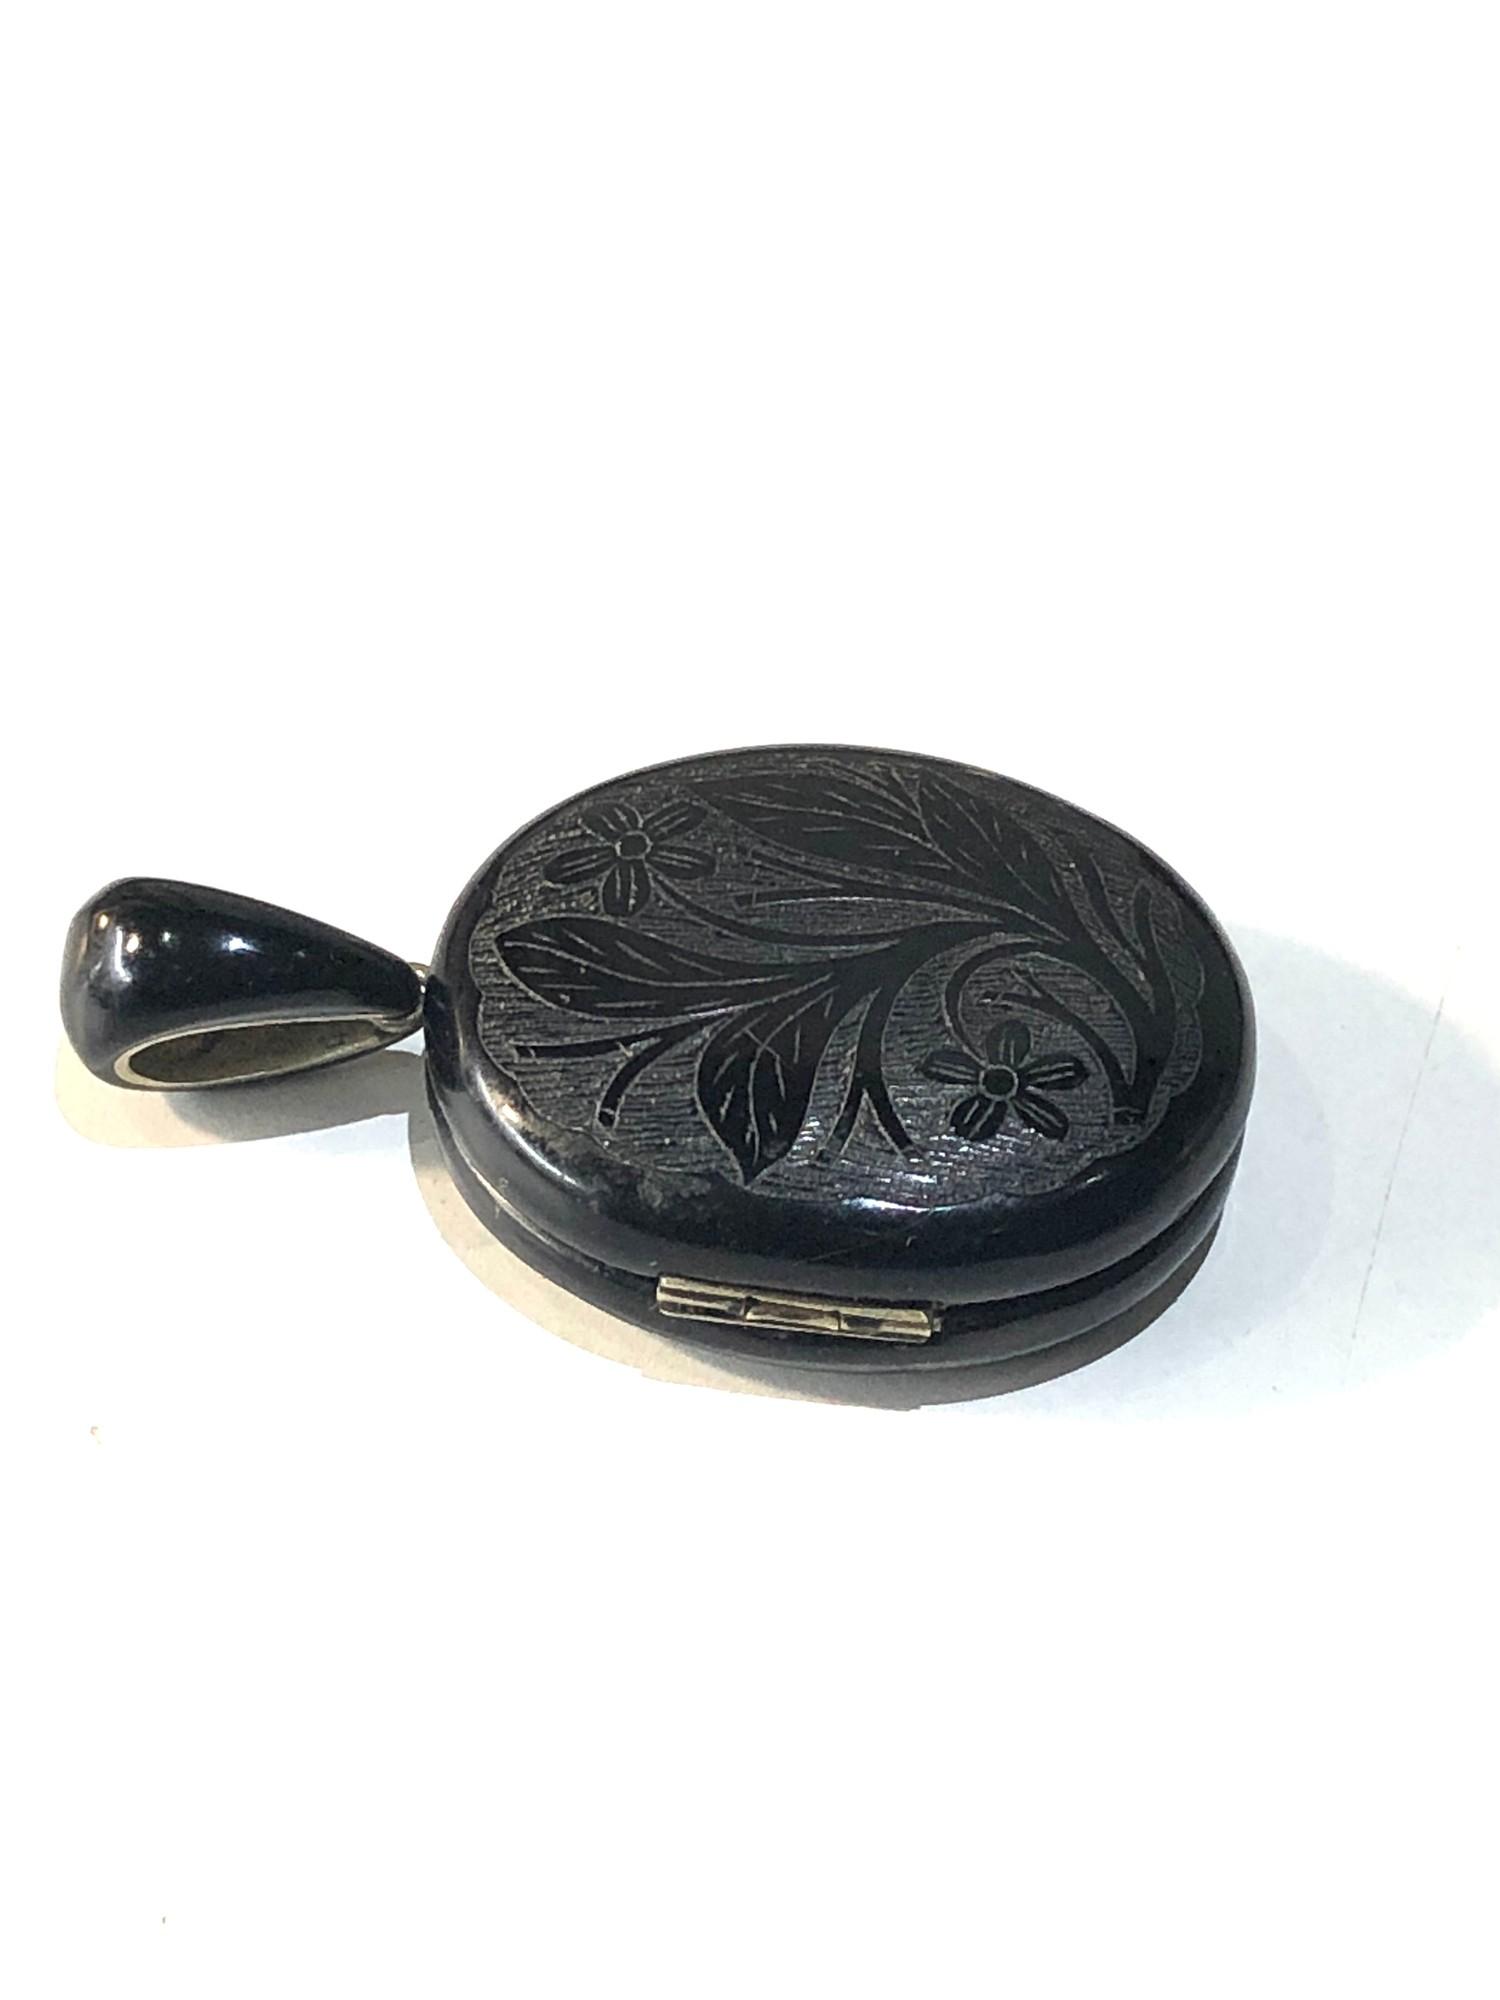 Antique Victorian whitby Jet Locket in good condition measures 6cm by 3.6 cm widest points closed